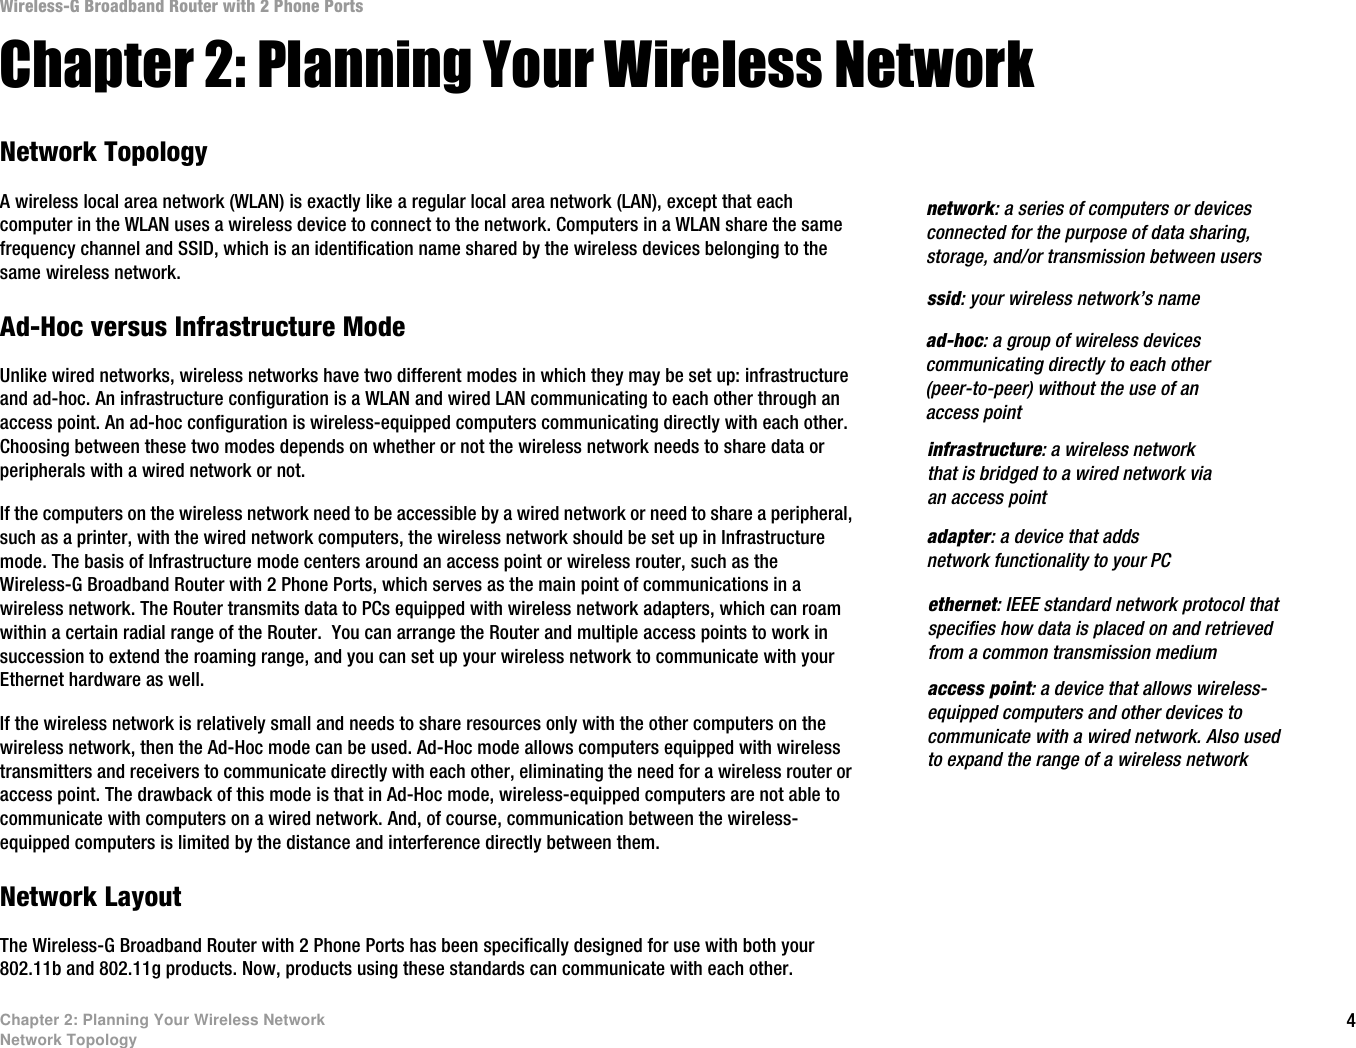 4Chapter 2: Planning Your Wireless NetworkNetwork TopologyWireless-G Broadband Router with 2 Phone PortsChapter 2: Planning Your Wireless NetworkNetwork TopologyA wireless local area network (WLAN) is exactly like a regular local area network (LAN), except that each computer in the WLAN uses a wireless device to connect to the network. Computers in a WLAN share the same frequency channel and SSID, which is an identification name shared by the wireless devices belonging to the same wireless network.Ad-Hoc versus Infrastructure ModeUnlike wired networks, wireless networks have two different modes in which they may be set up: infrastructure and ad-hoc. An infrastructure configuration is a WLAN and wired LAN communicating to each other through an access point. An ad-hoc configuration is wireless-equipped computers communicating directly with each other. Choosing between these two modes depends on whether or not the wireless network needs to share data or peripherals with a wired network or not. If the computers on the wireless network need to be accessible by a wired network or need to share a peripheral, such as a printer, with the wired network computers, the wireless network should be set up in Infrastructure mode. The basis of Infrastructure mode centers around an access point or wireless router, such as the Wireless-G Broadband Router with 2 Phone Ports, which serves as the main point of communications in a wireless network. The Router transmits data to PCs equipped with wireless network adapters, which can roam within a certain radial range of the Router.  You can arrange the Router and multiple access points to work in succession to extend the roaming range, and you can set up your wireless network to communicate with your Ethernet hardware as well. If the wireless network is relatively small and needs to share resources only with the other computers on the wireless network, then the Ad-Hoc mode can be used. Ad-Hoc mode allows computers equipped with wireless transmitters and receivers to communicate directly with each other, eliminating the need for a wireless router or access point. The drawback of this mode is that in Ad-Hoc mode, wireless-equipped computers are not able to communicate with computers on a wired network. And, of course, communication between the wireless-equipped computers is limited by the distance and interference directly between them. Network LayoutThe Wireless-G Broadband Router with 2 Phone Ports has been specifically designed for use with both your 802.11b and 802.11g products. Now, products using these standards can communicate with each other.infrastructure: a wireless network that is bridged to a wired network via an access pointssid: your wireless network’s namead-hoc: a group of wireless devices communicating directly to each other (peer-to-peer) without the use of an access pointaccess point: a device that allows wireless-equipped computers and other devices to communicate with a wired network. Also used to expand the range of a wireless networkadapter: a device that adds network functionality to your PCethernet: IEEE standard network protocol that specifies how data is placed on and retrieved from a common transmission mediumnetwork: a series of computers or devices connected for the purpose of data sharing, storage, and/or transmission between users